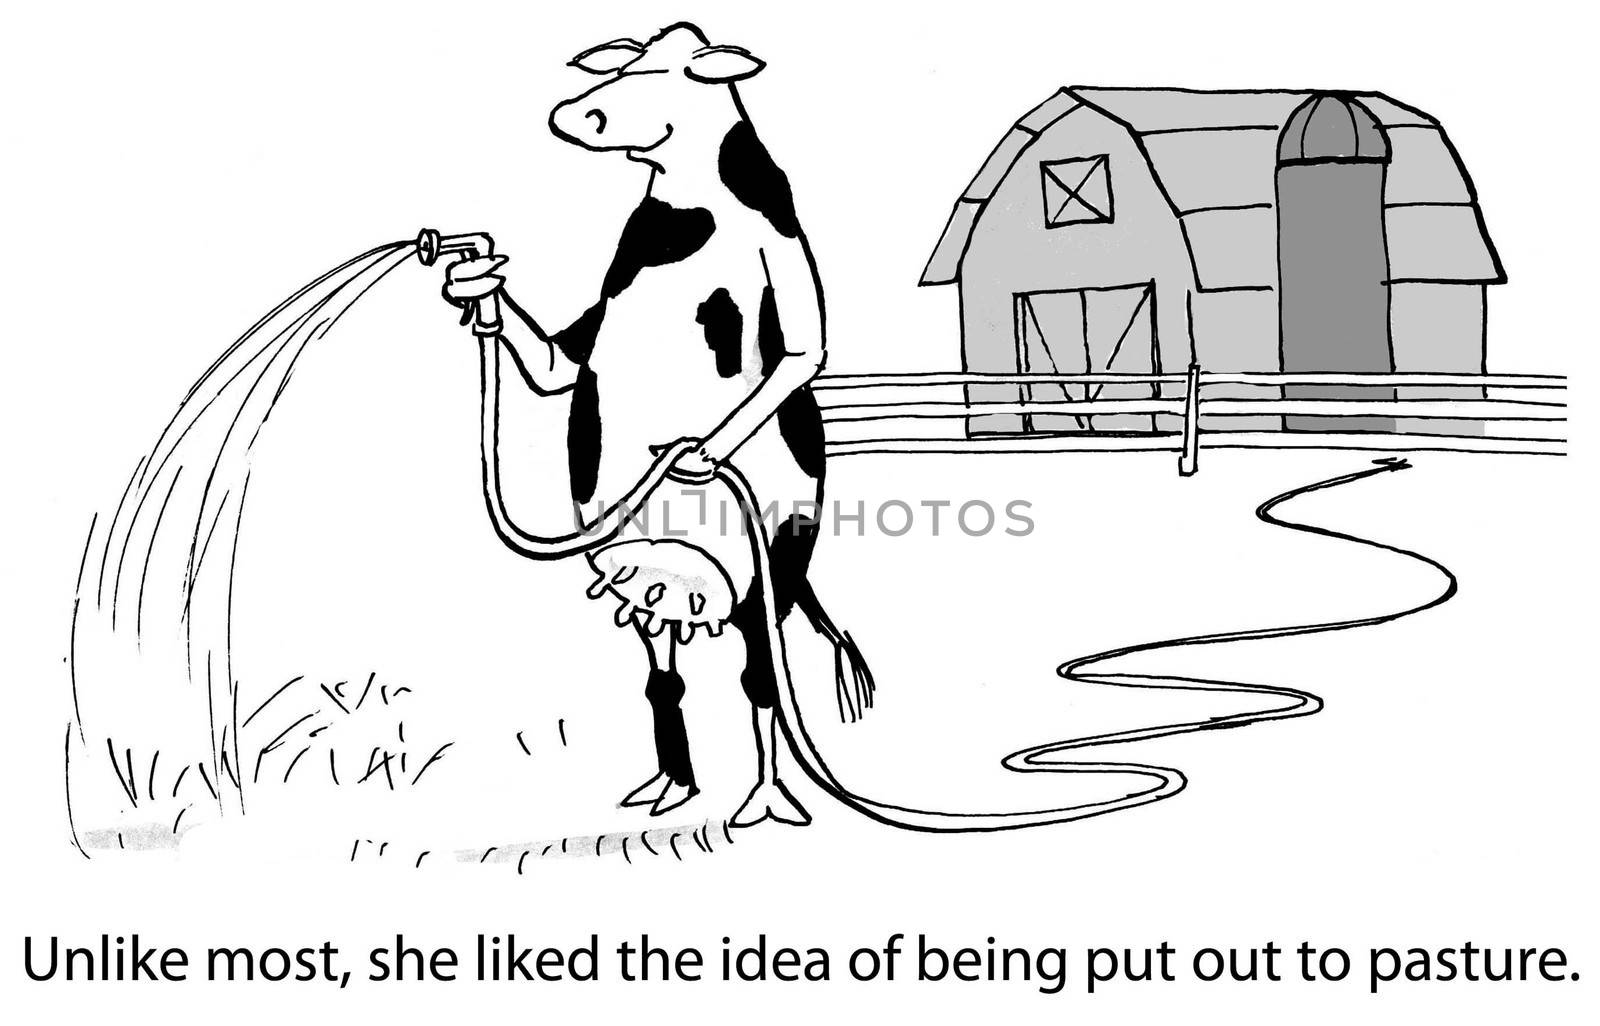 Unlike most, she liked the idea of being put out to pasture.